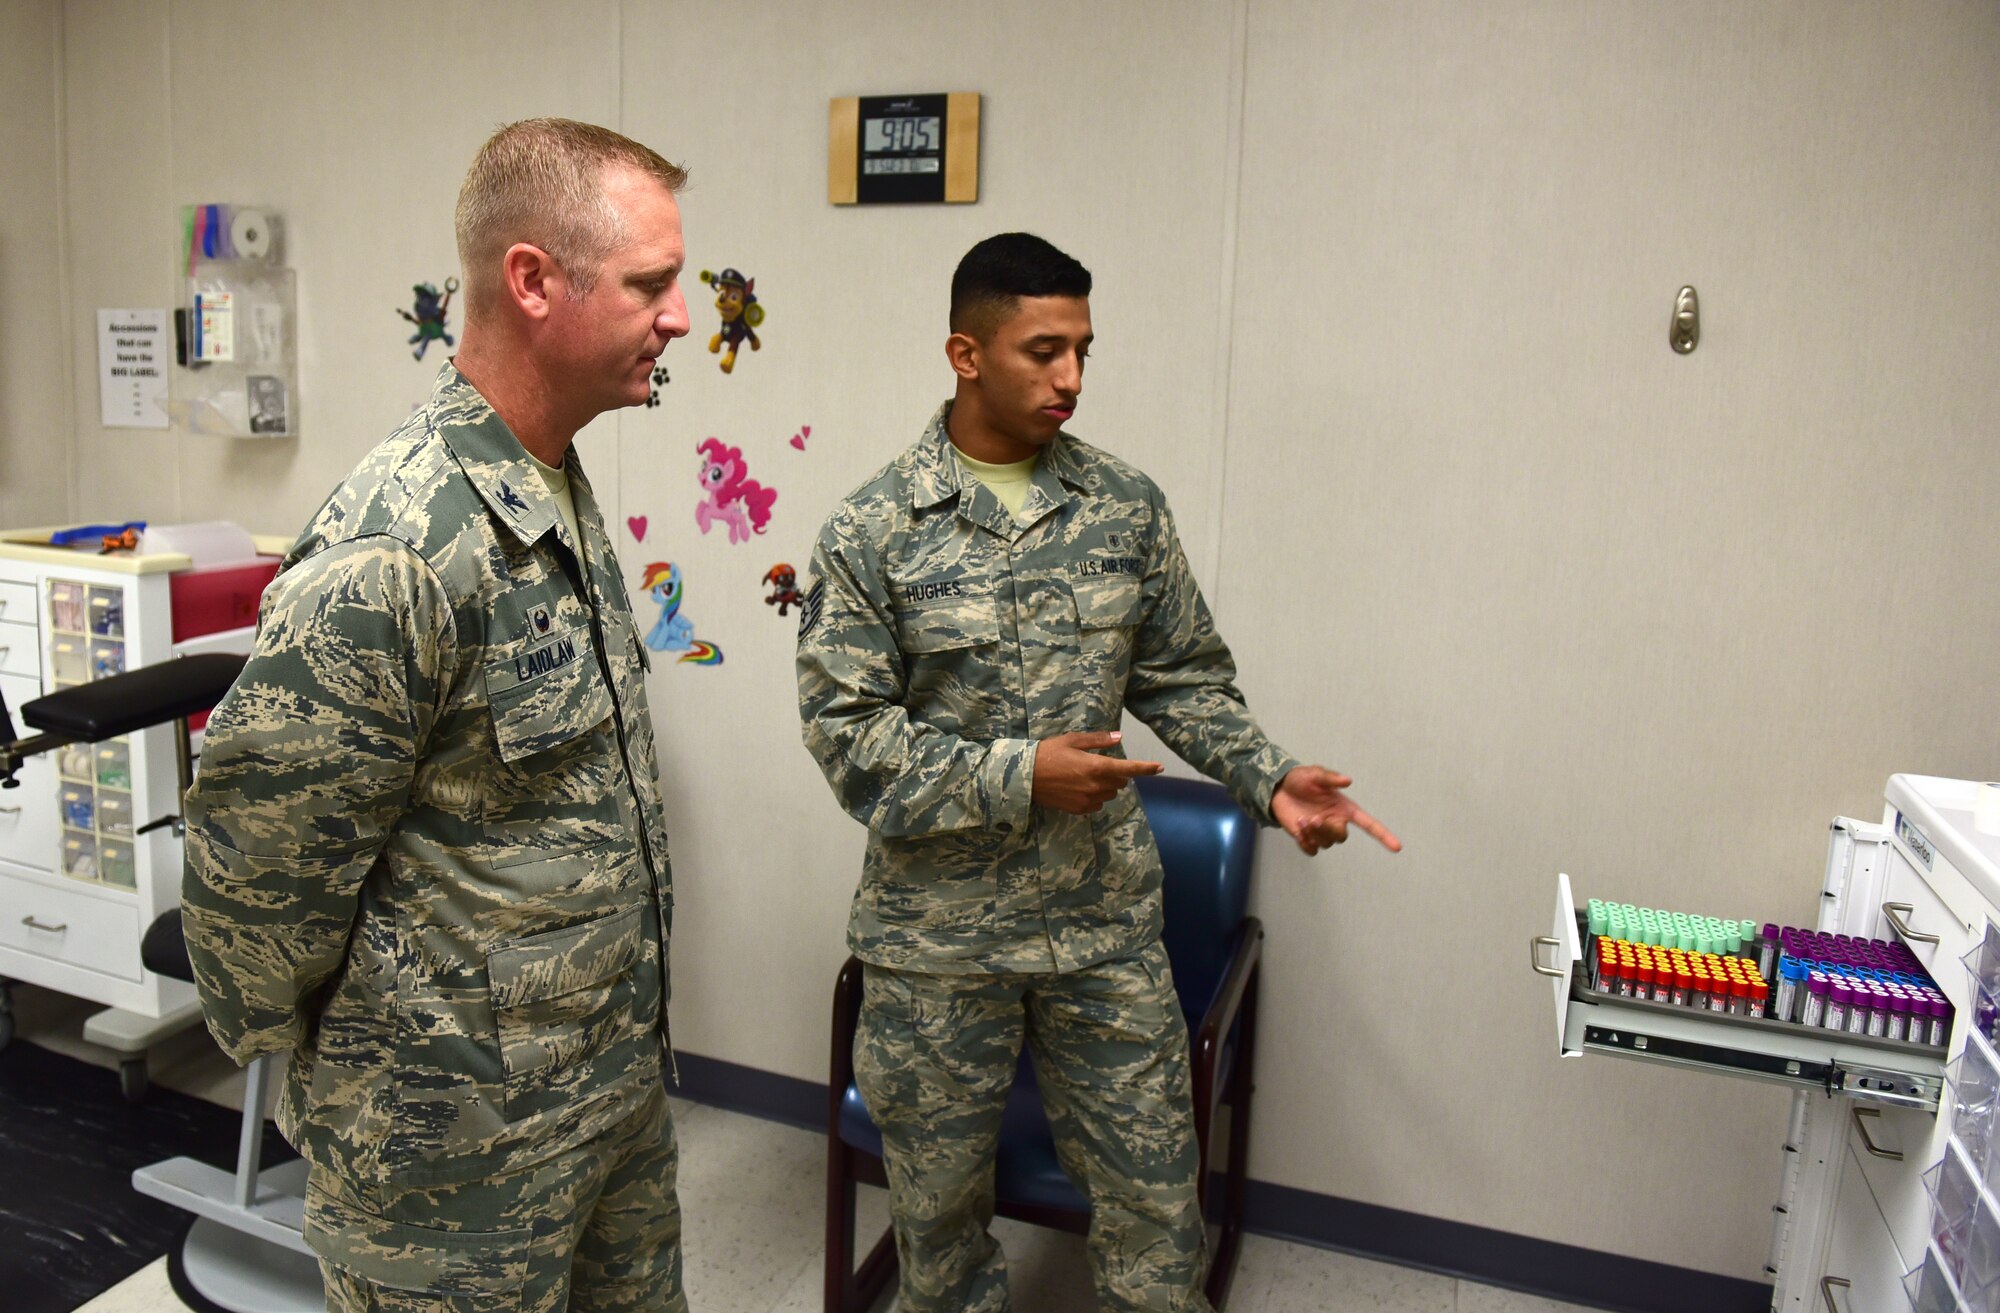 U.S. Air Force Staff Sgt. Jadow Hughes, 325th Medical Support Squadron laboratory technician, shows Col. Brian Laidlaw, 325th Fighter Wing commander, how vials of blood are stored after they are drawn from patients at Tyndall Air Force Base, Fla., Sept. 5, 2018. Helping conduct essential tests on body substances, medical laboratory specialists have an integral role in providing patients with a proper diagnosis and treatment. (U.S. Air Force photo by Senior Airman Cody R. Miller)